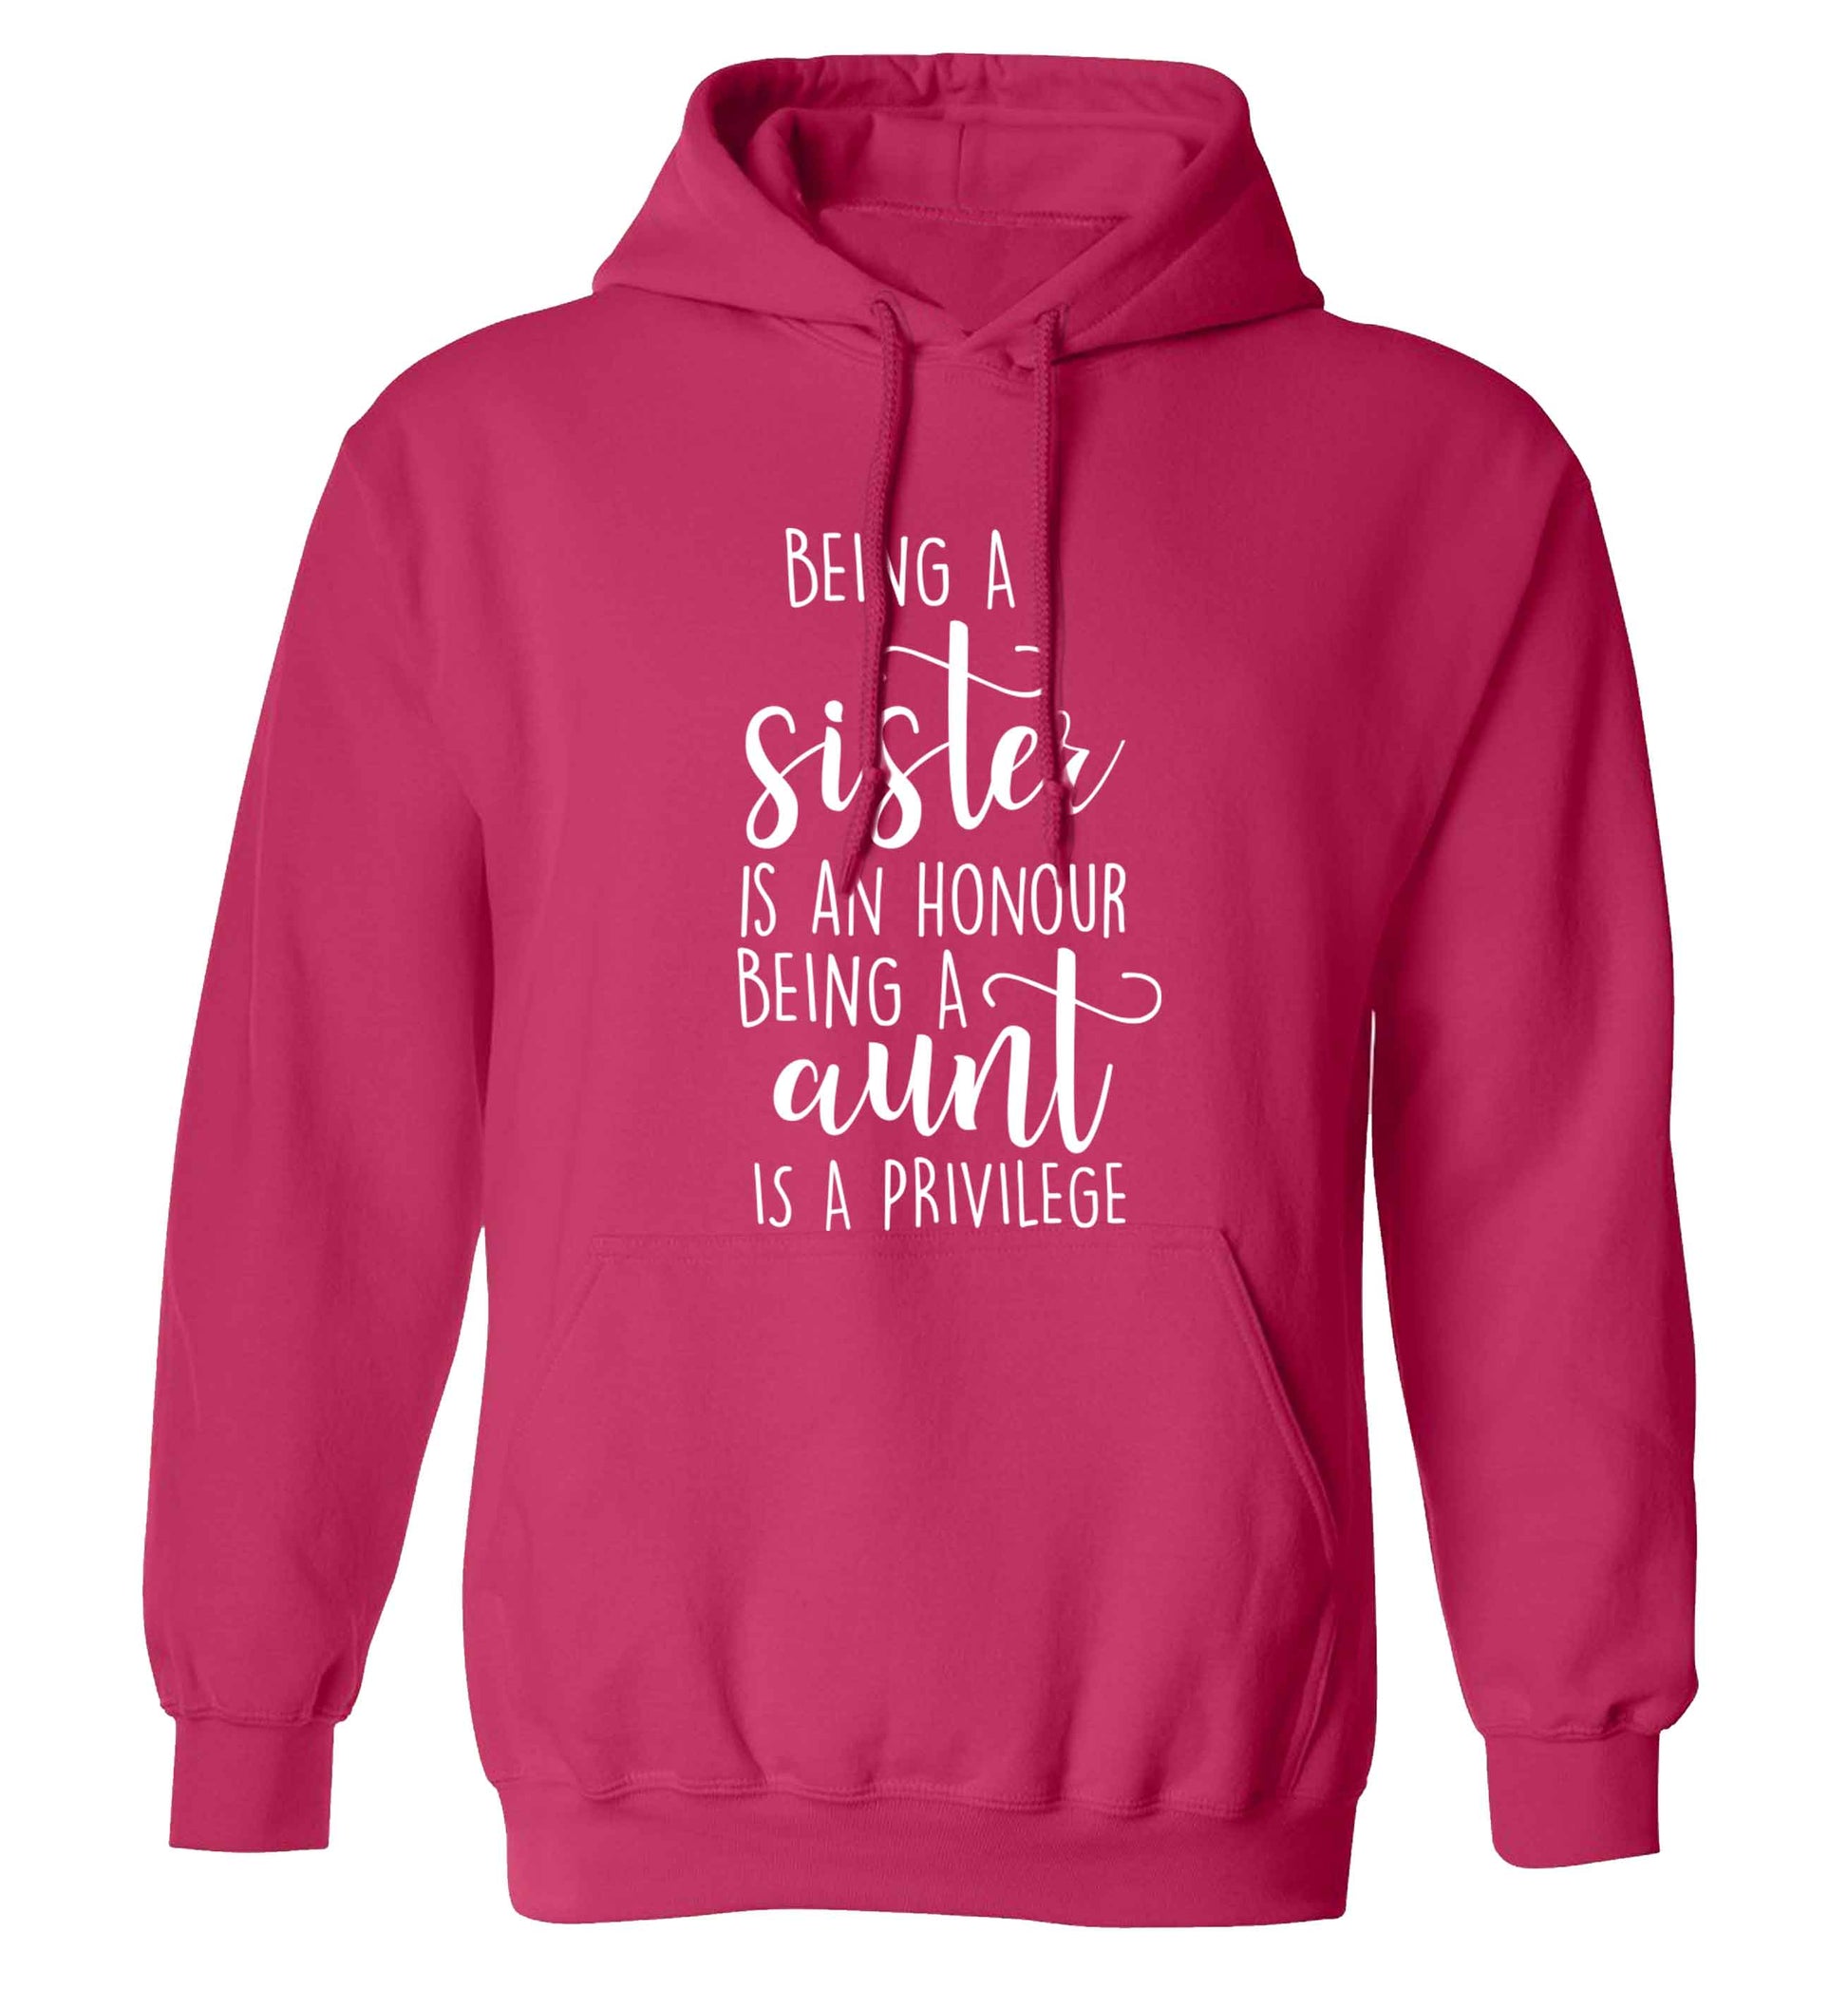 Being a sister is an honour being an auntie is a privilege adults unisex pink hoodie 2XL